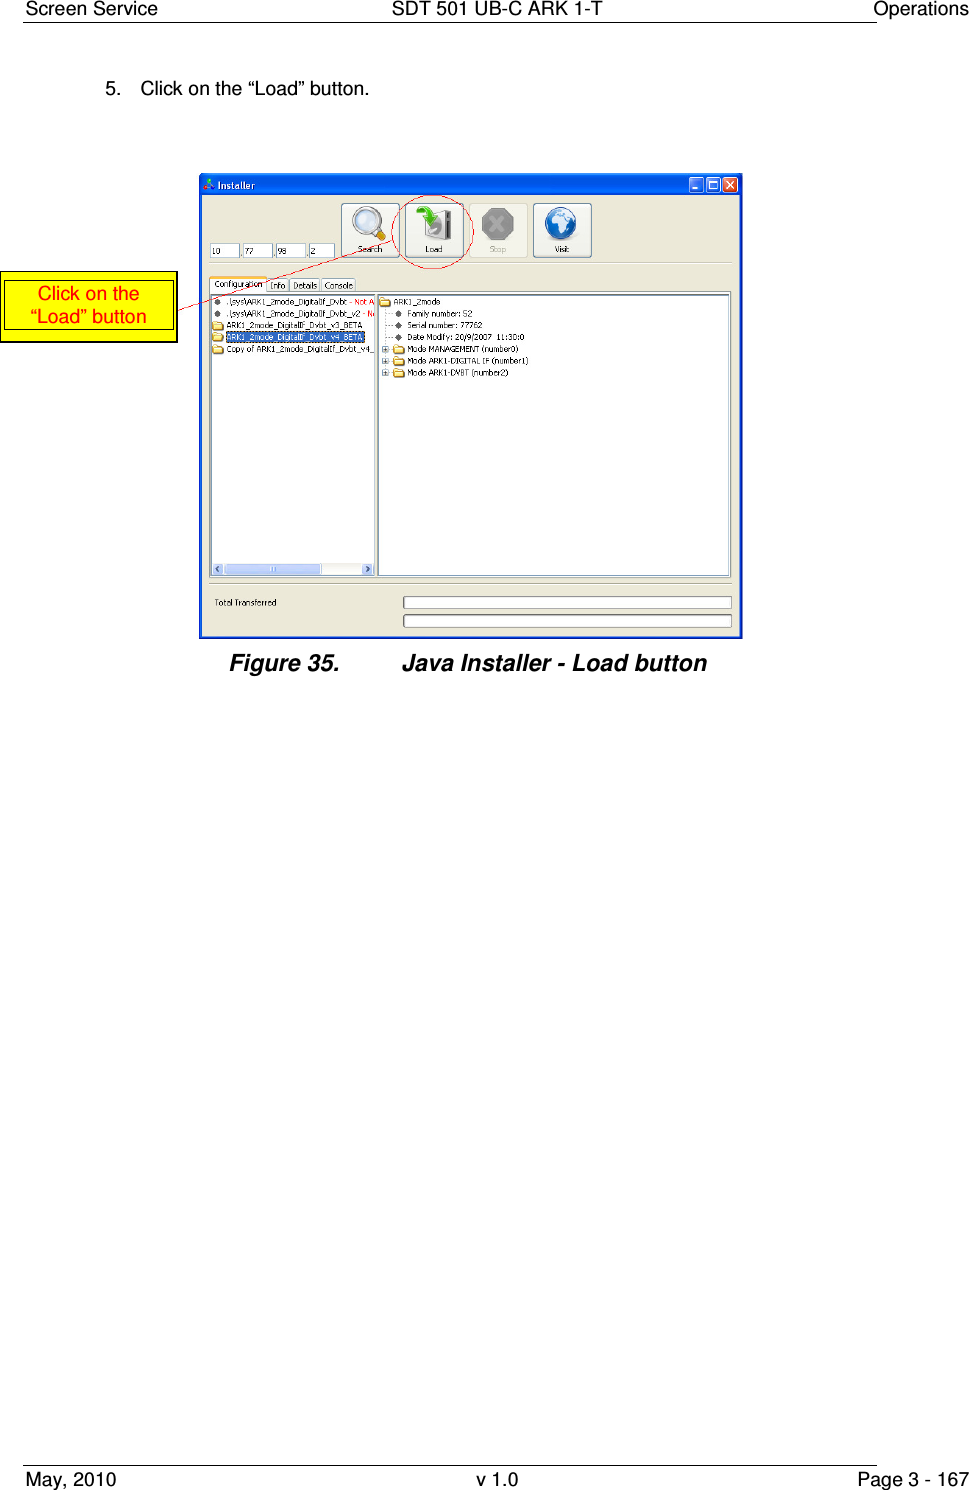 Screen Service  SDT 501 UB-C ARK 1-T  Operations May, 2010  v 1.0  Page 3 - 167 5.  Click on the “Load” button. Figure 35.  Java Installer - Load button   Click on the “Load” button  